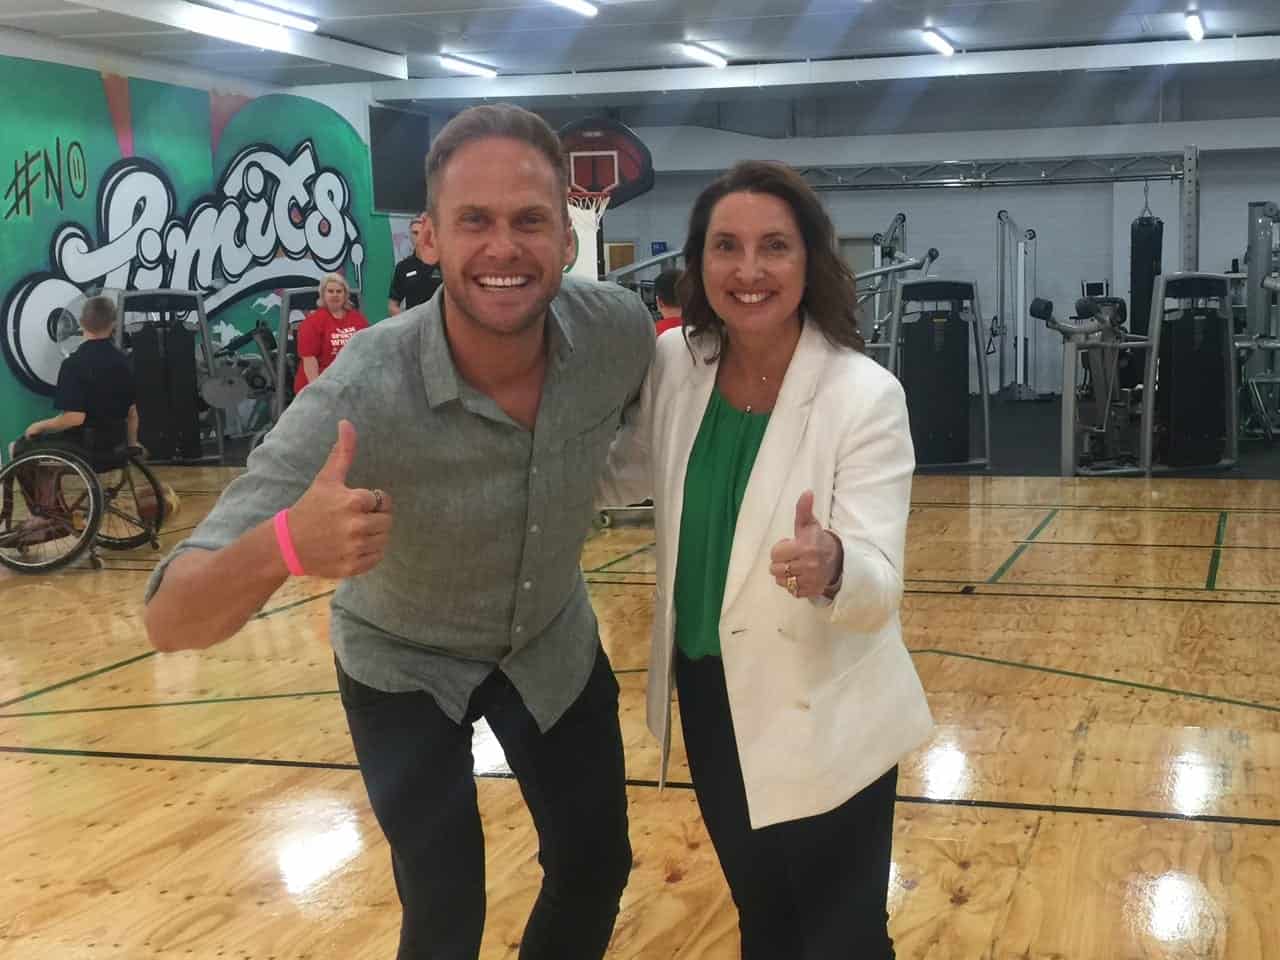 On the court, Sporting Wheelies CEO Amanda comes together for photo with a man.